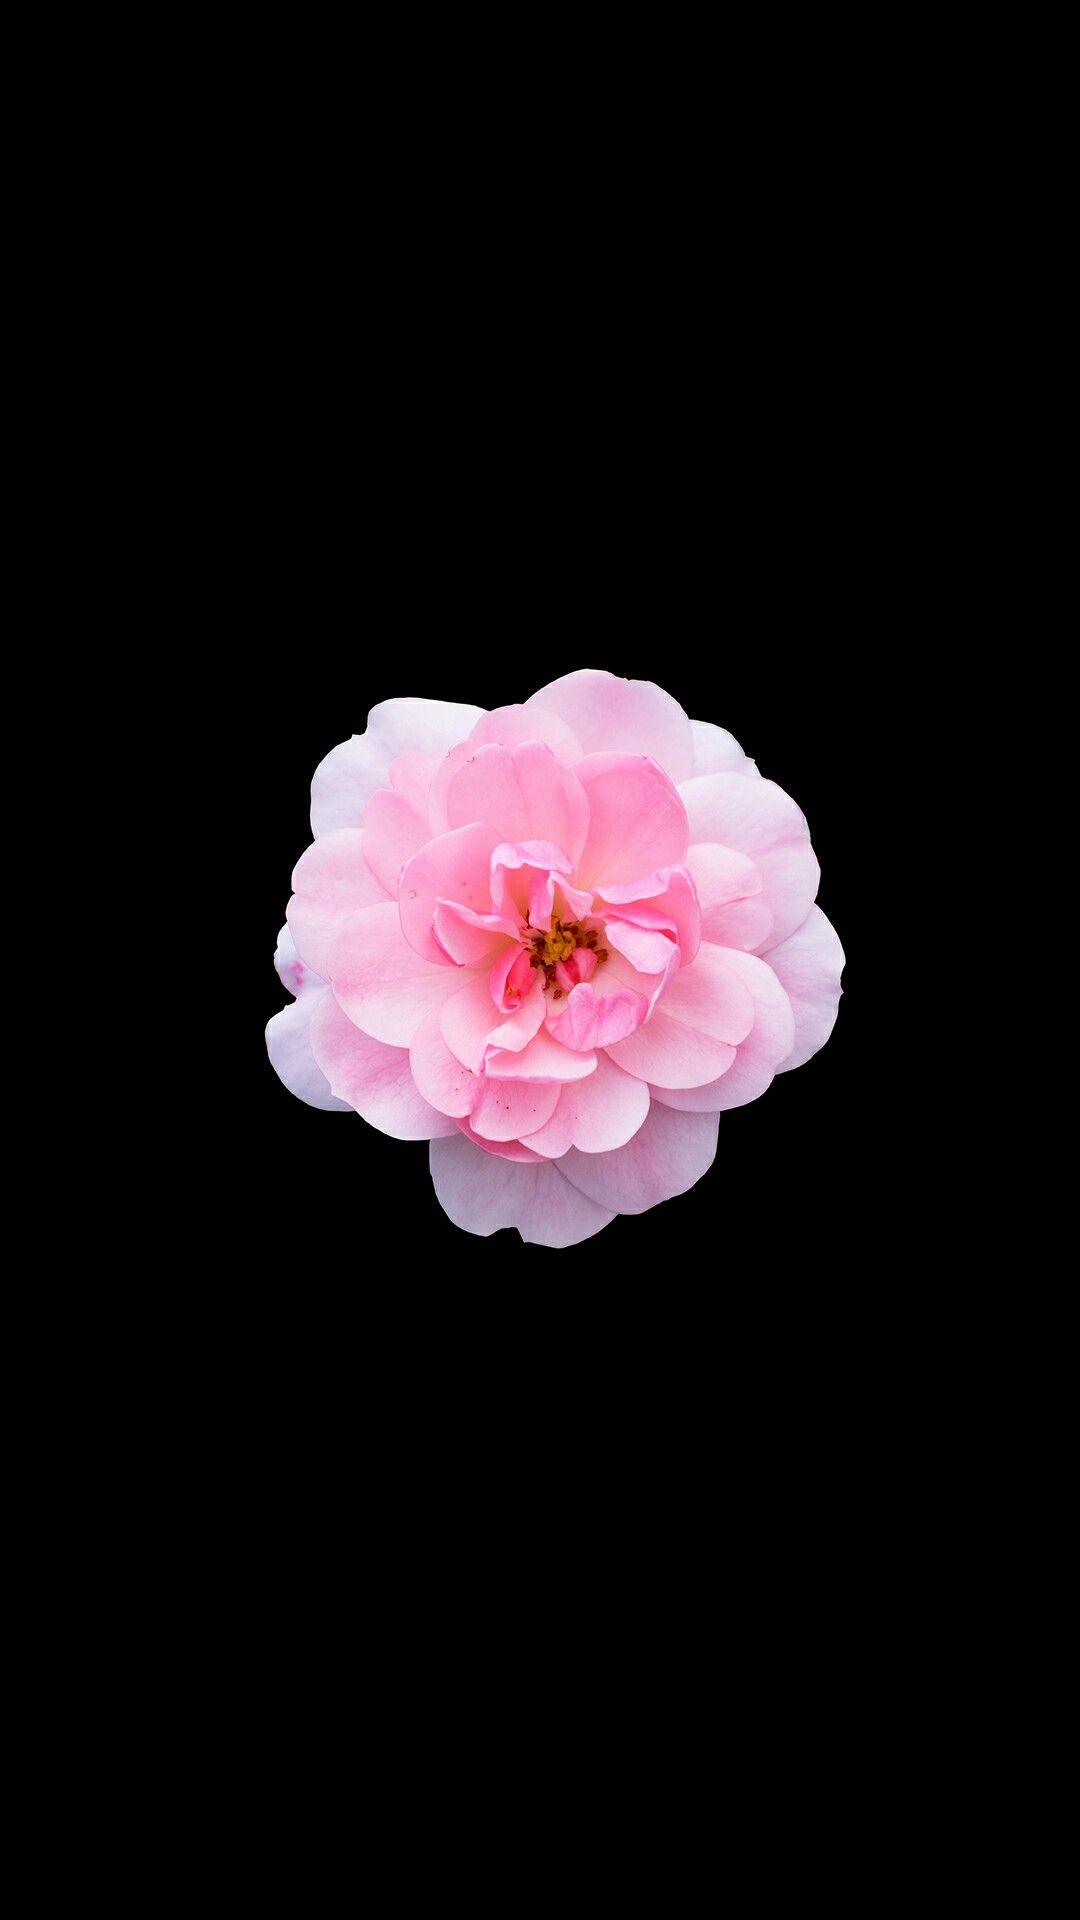 Pink And Black Flower Wallpapers - Wallpaper Cave